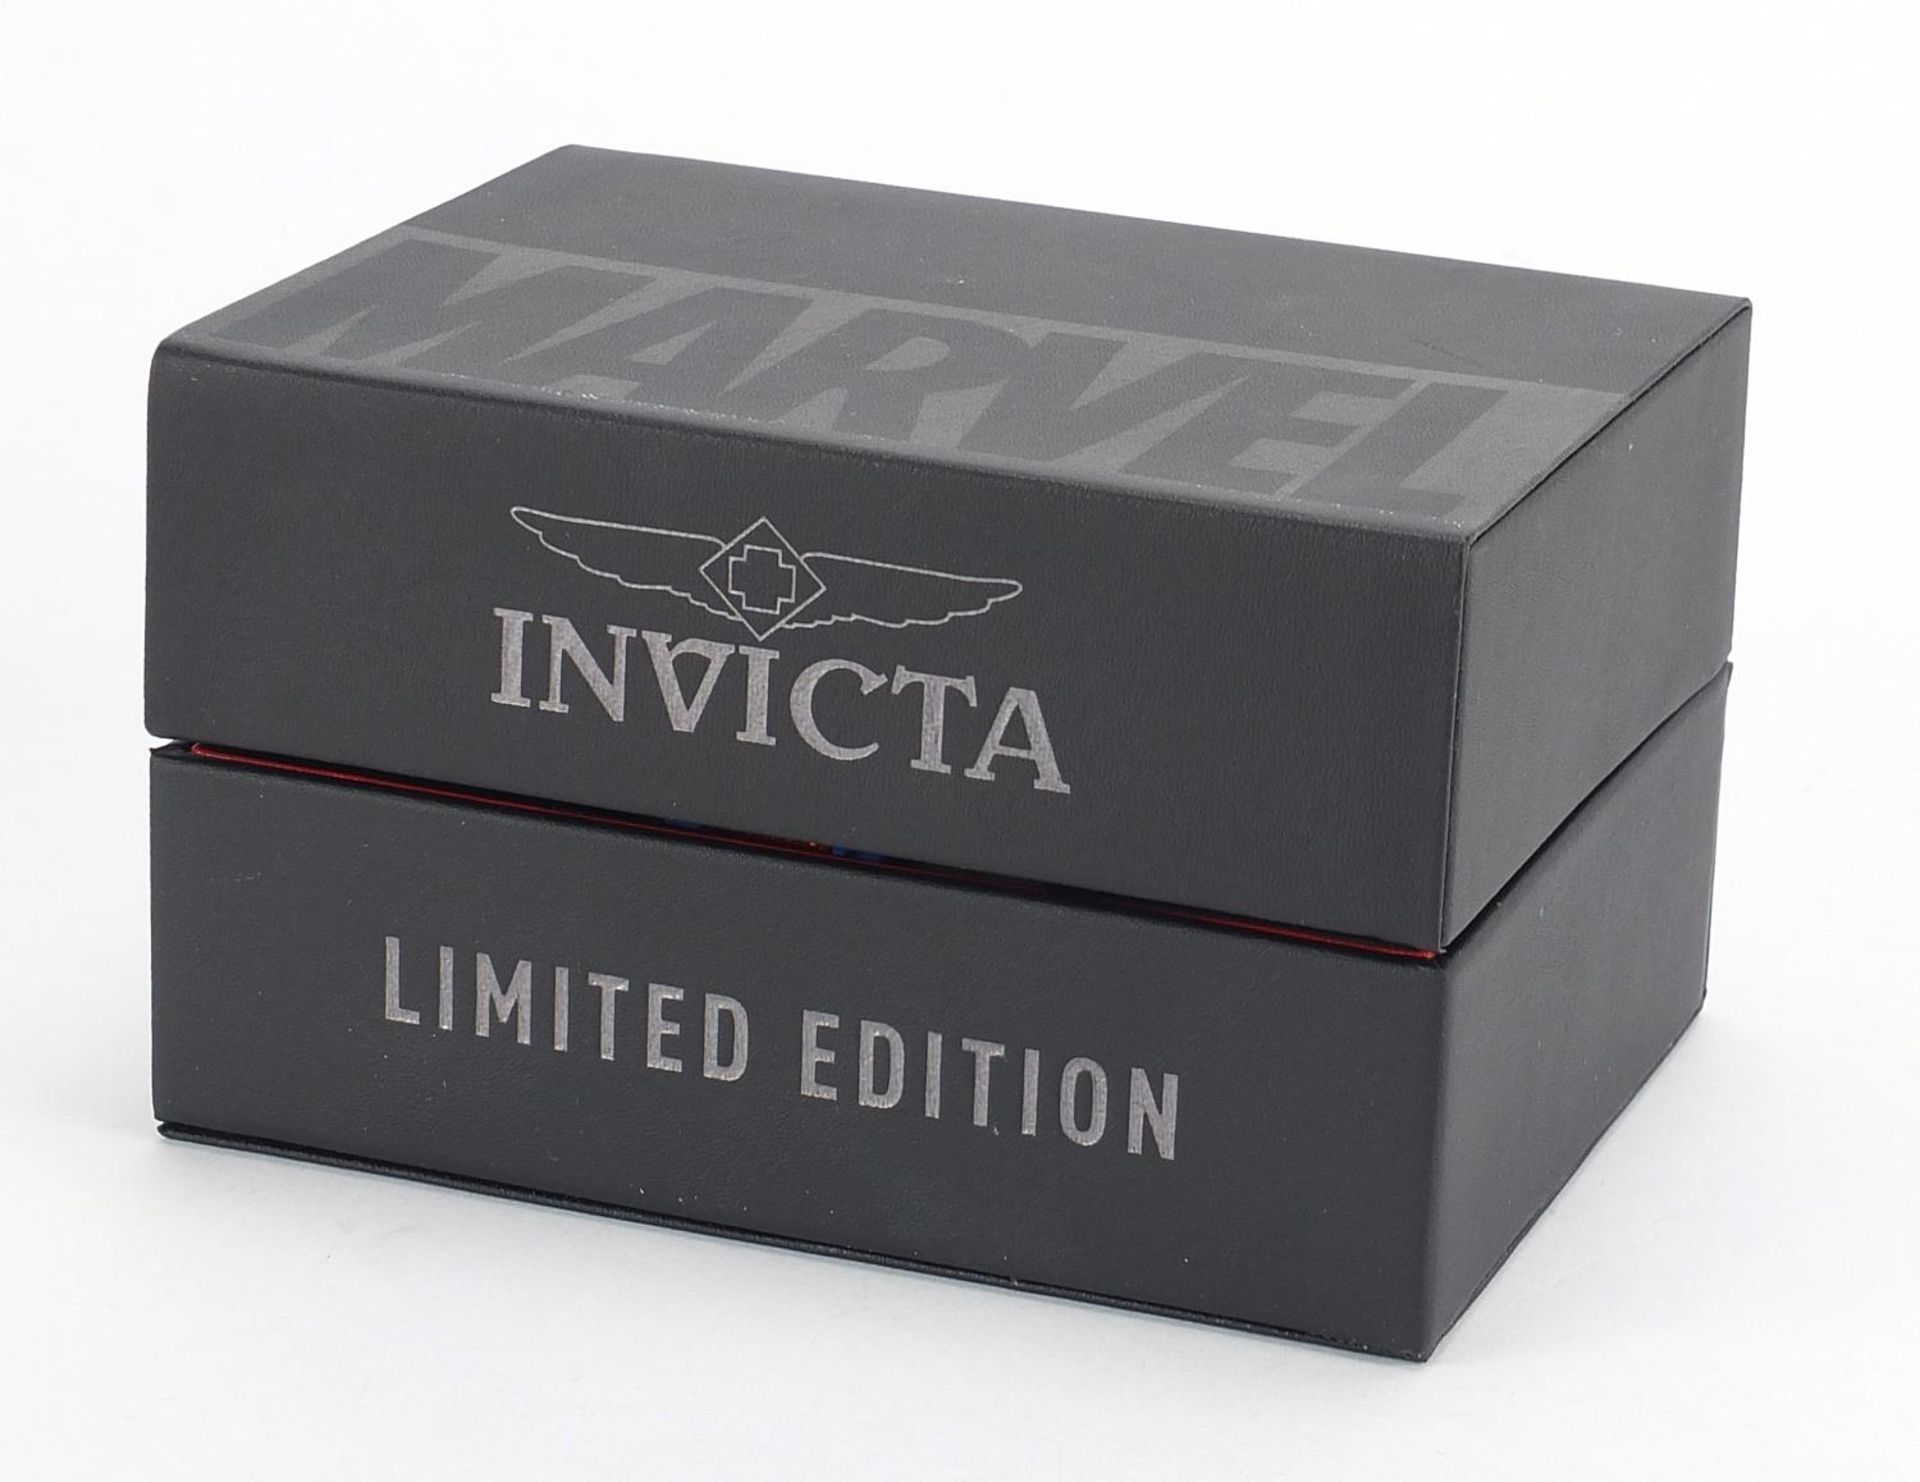 Invicta, gentlemen's Marvel Spiderman wristwatch with box and paperwork, limited edition 0741/ - Image 7 of 7